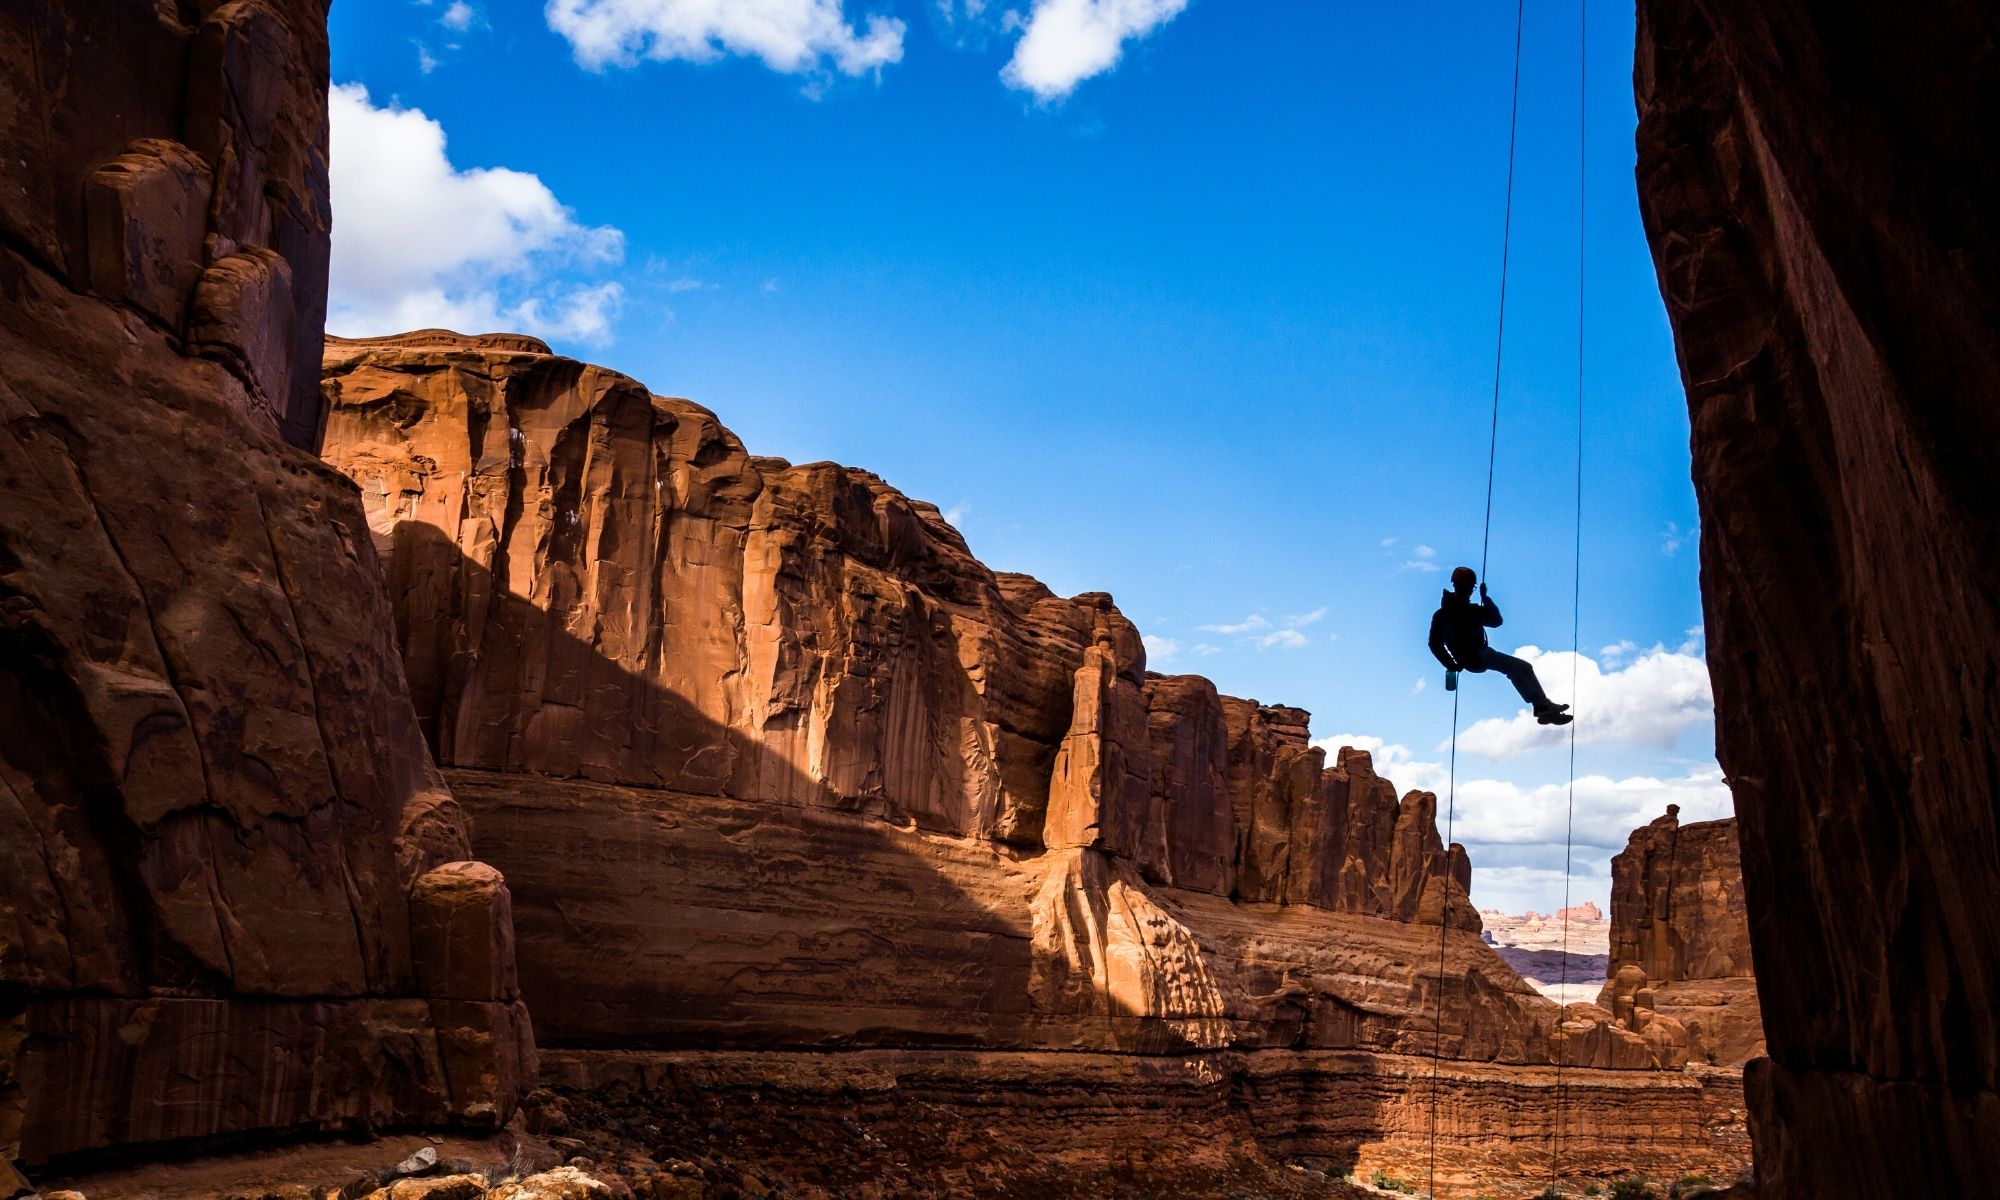 Canyoneering in beautiful, picturesque Moab Canyon in Utah, USA